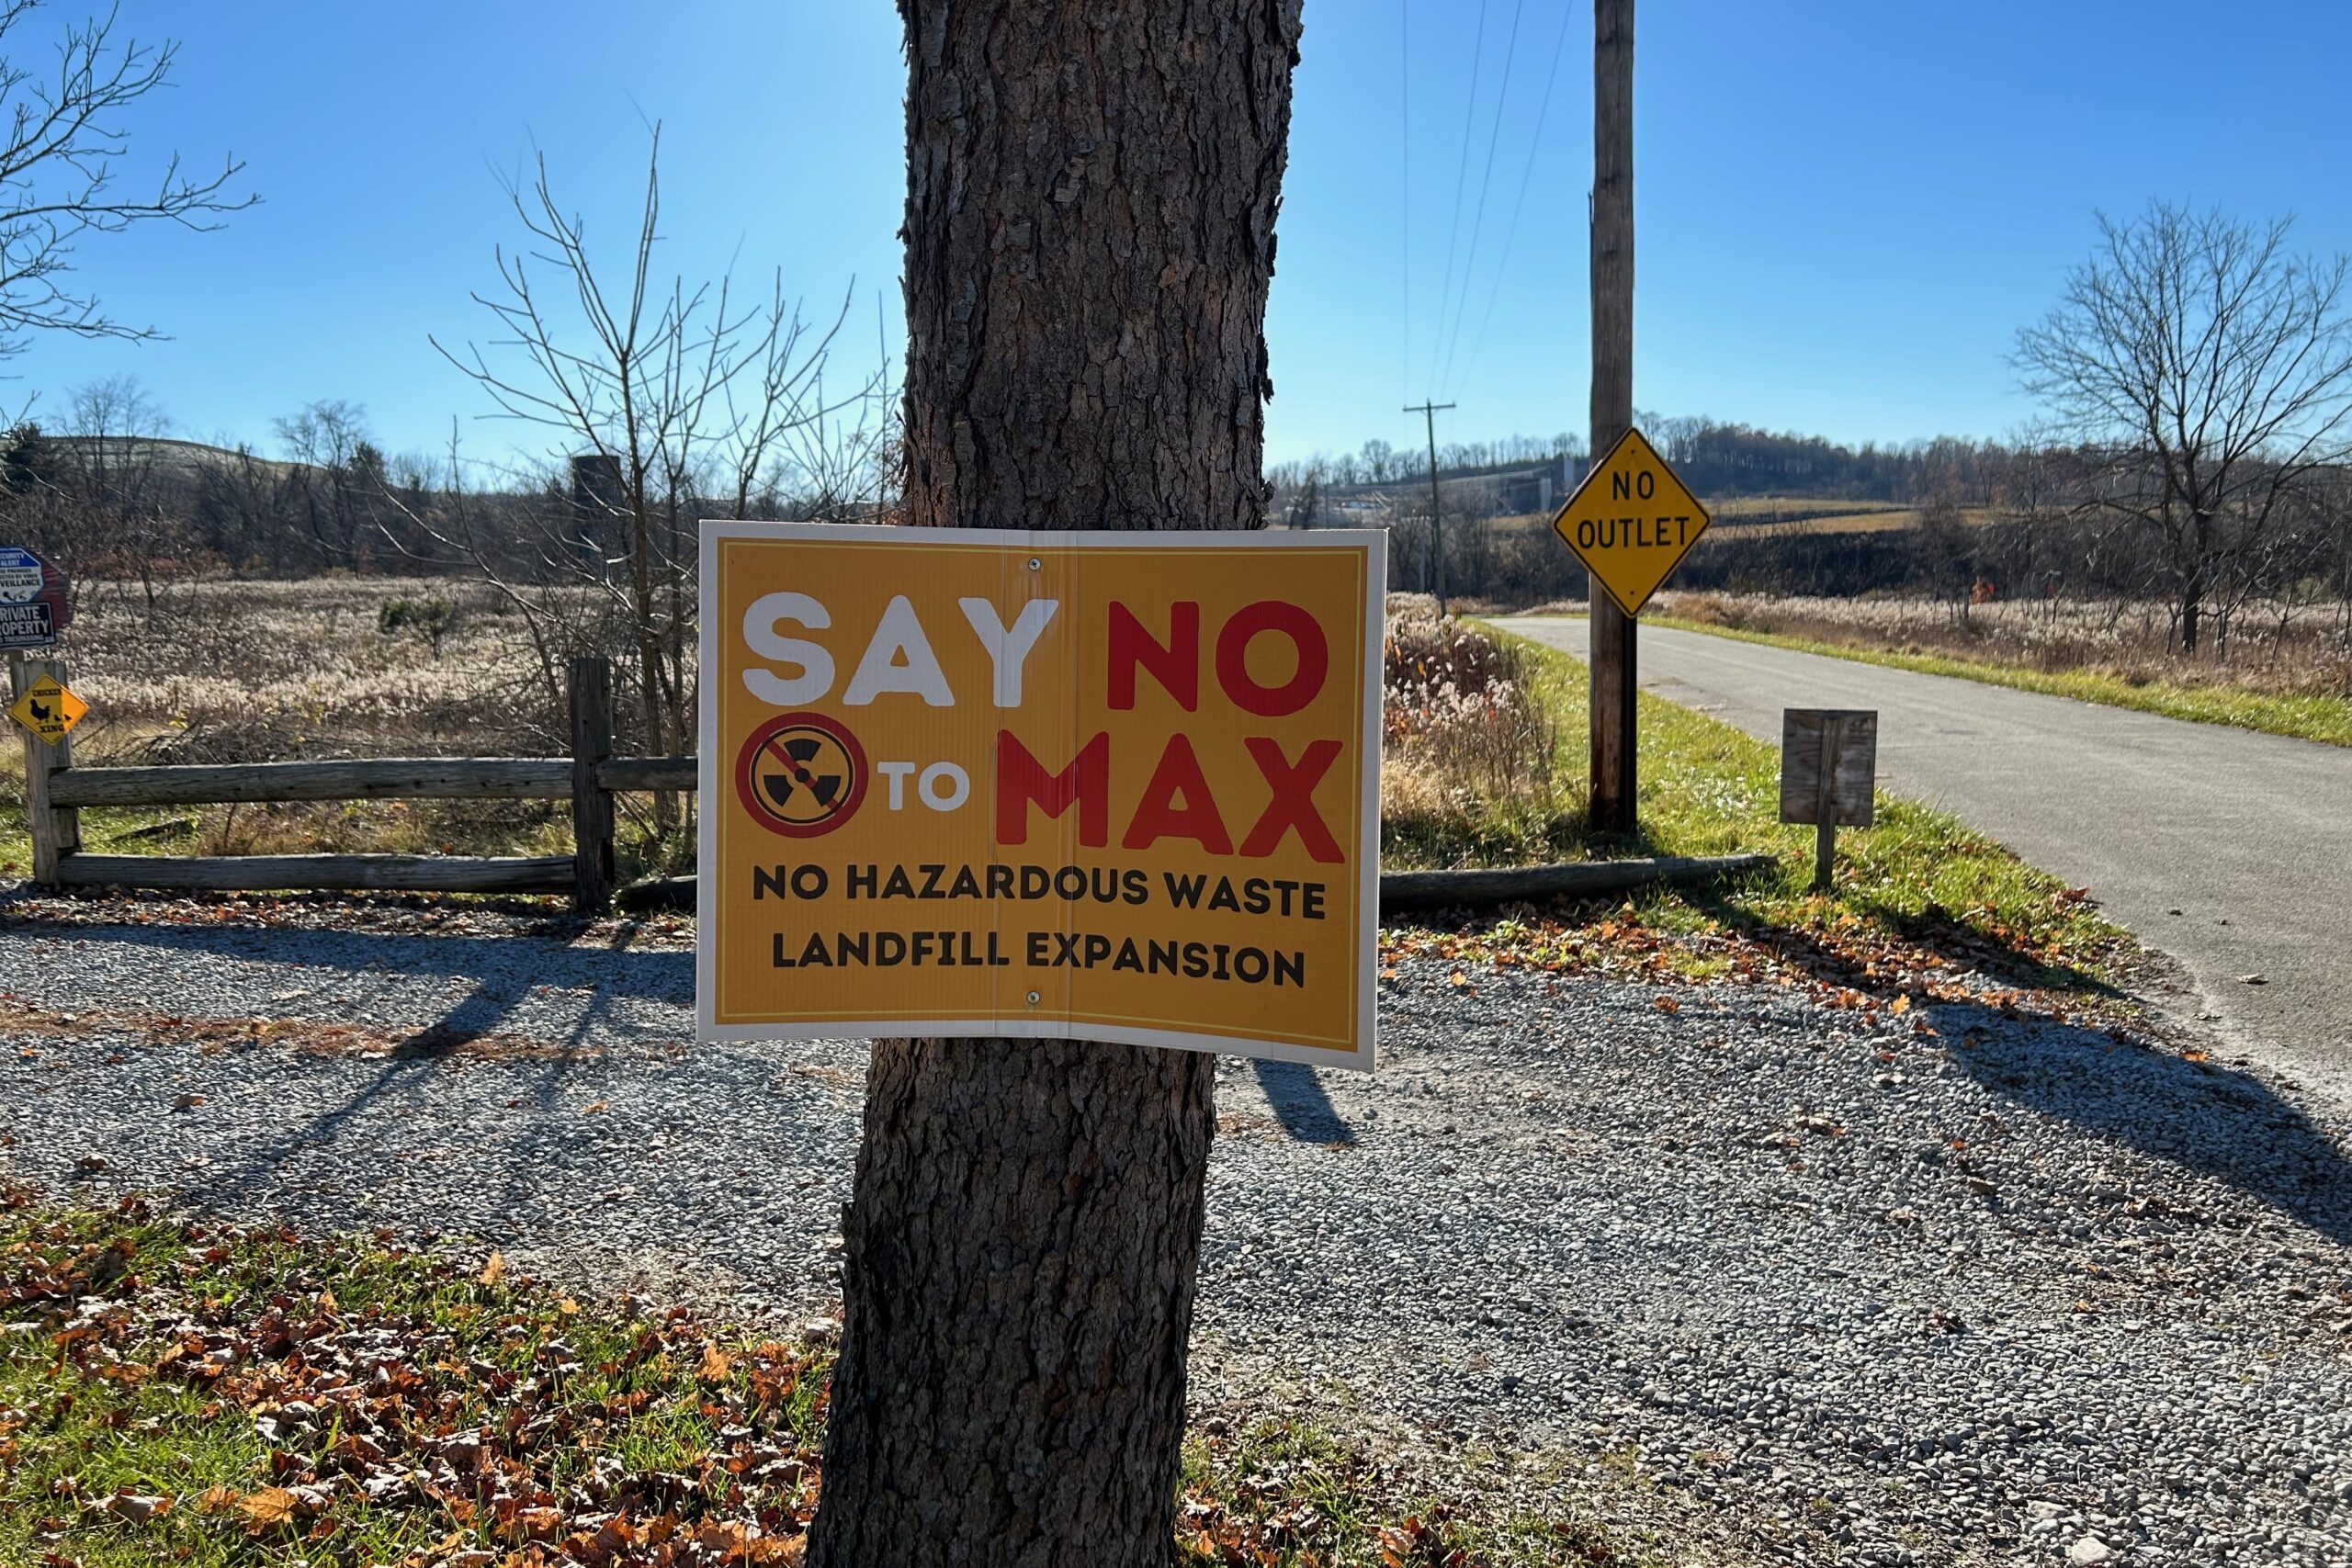 A sign that says "Say No to Max" hangs on a tree